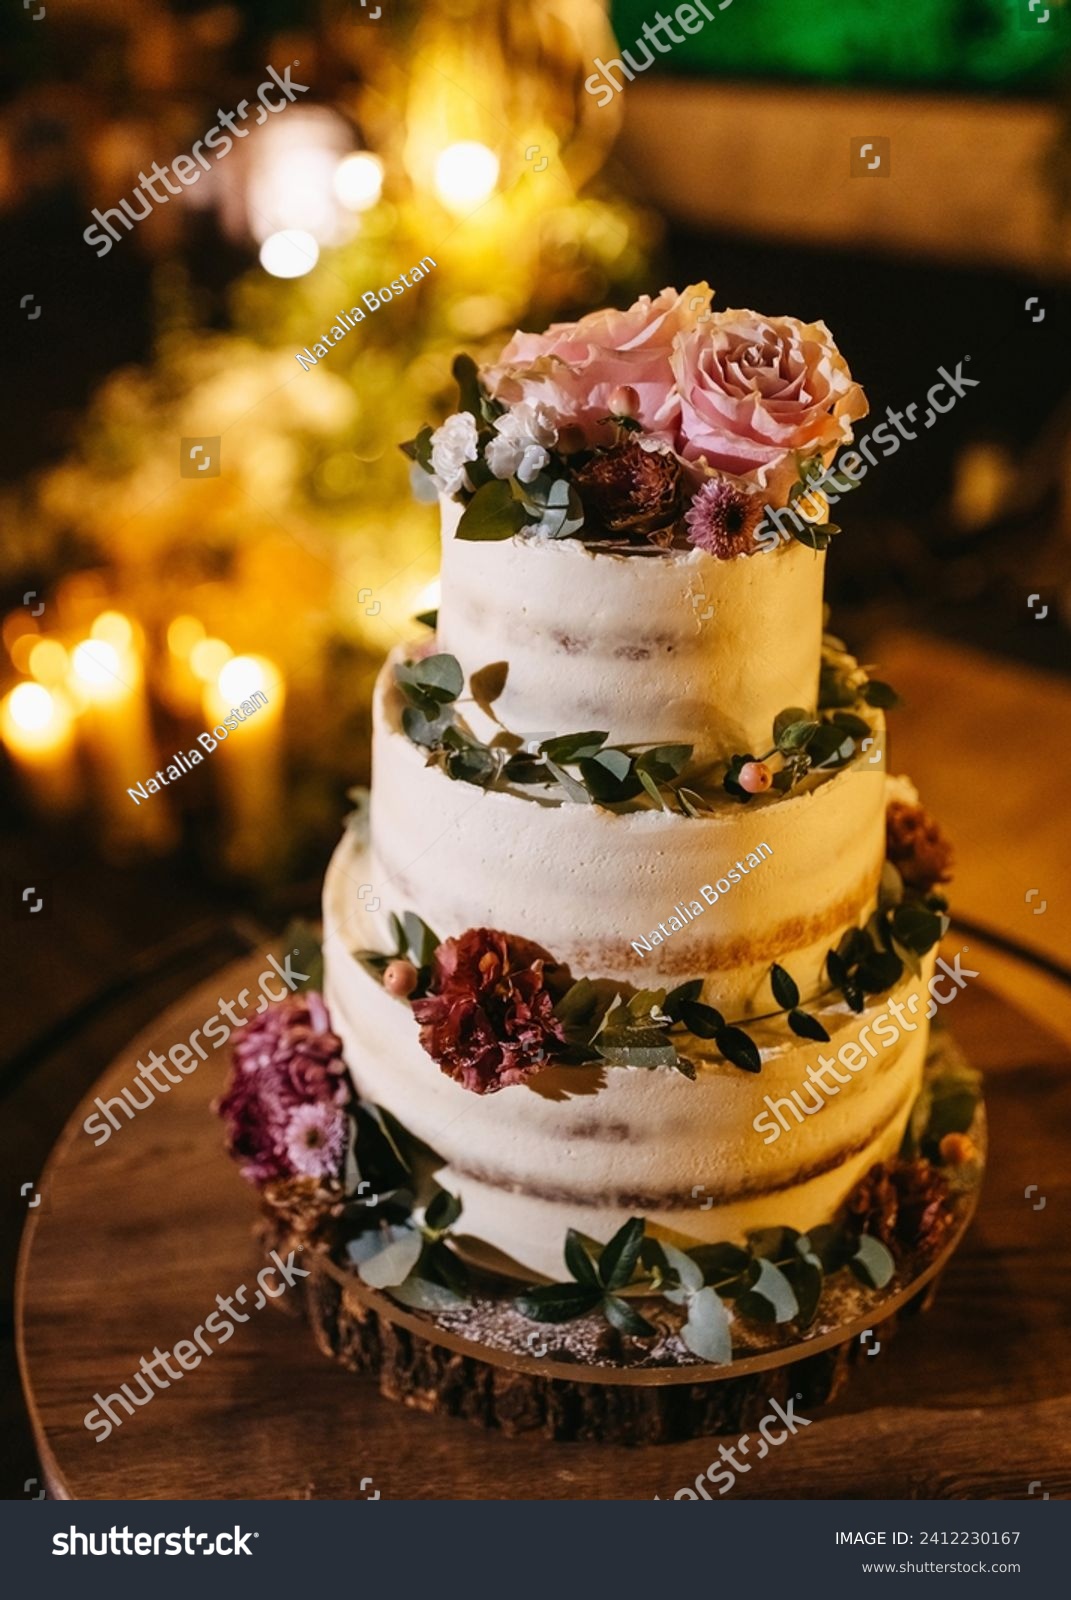 A three-tiered wedding cake adorned with fresh flowers and greenery, set against a backdrop of warm candlelight. #2412230167